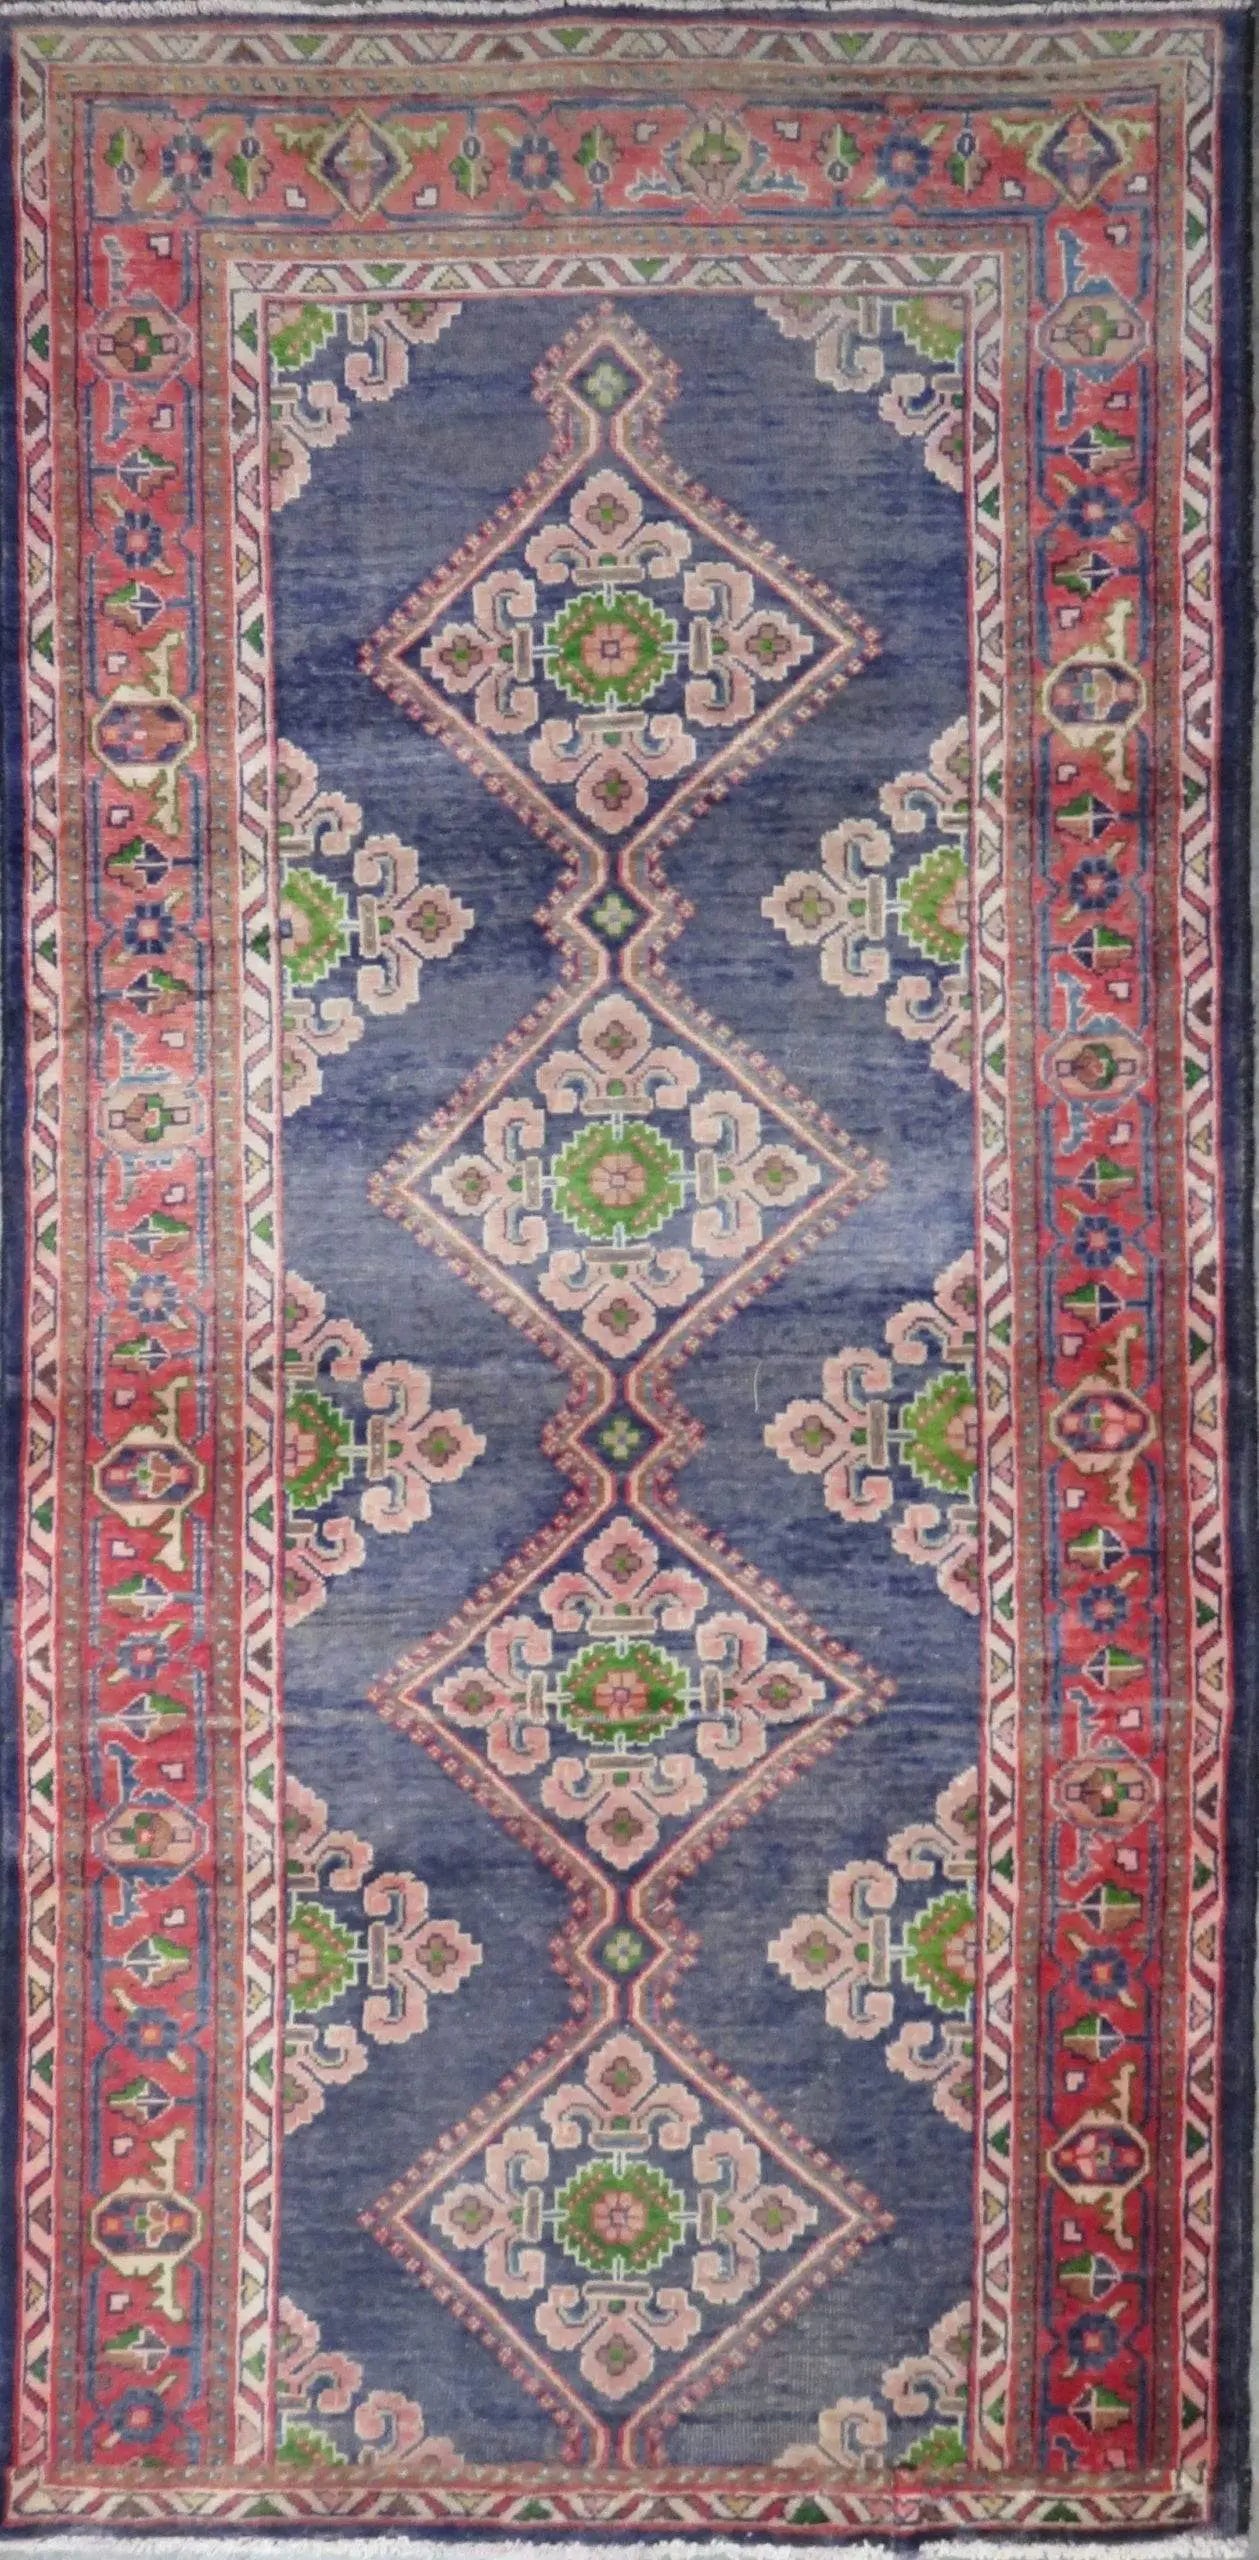 Hand-Knotted Persian Wool Rug _ Luxurious Vintage Design, 7'5" x 3'6", Artisan Crafted